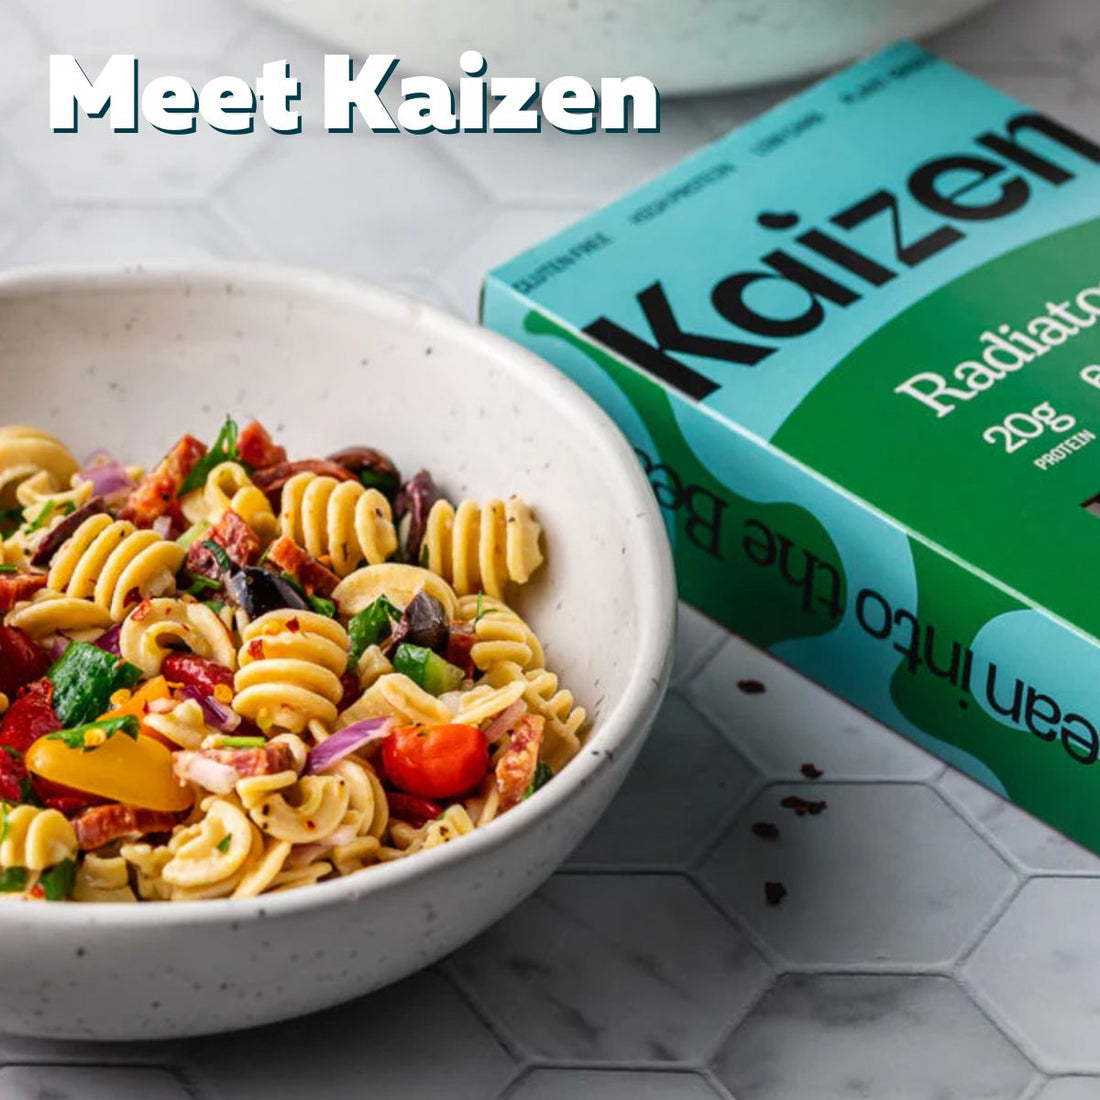 Kaizen Pasta: A Low Carb Pasta Company Revolutionizing the Food Industry